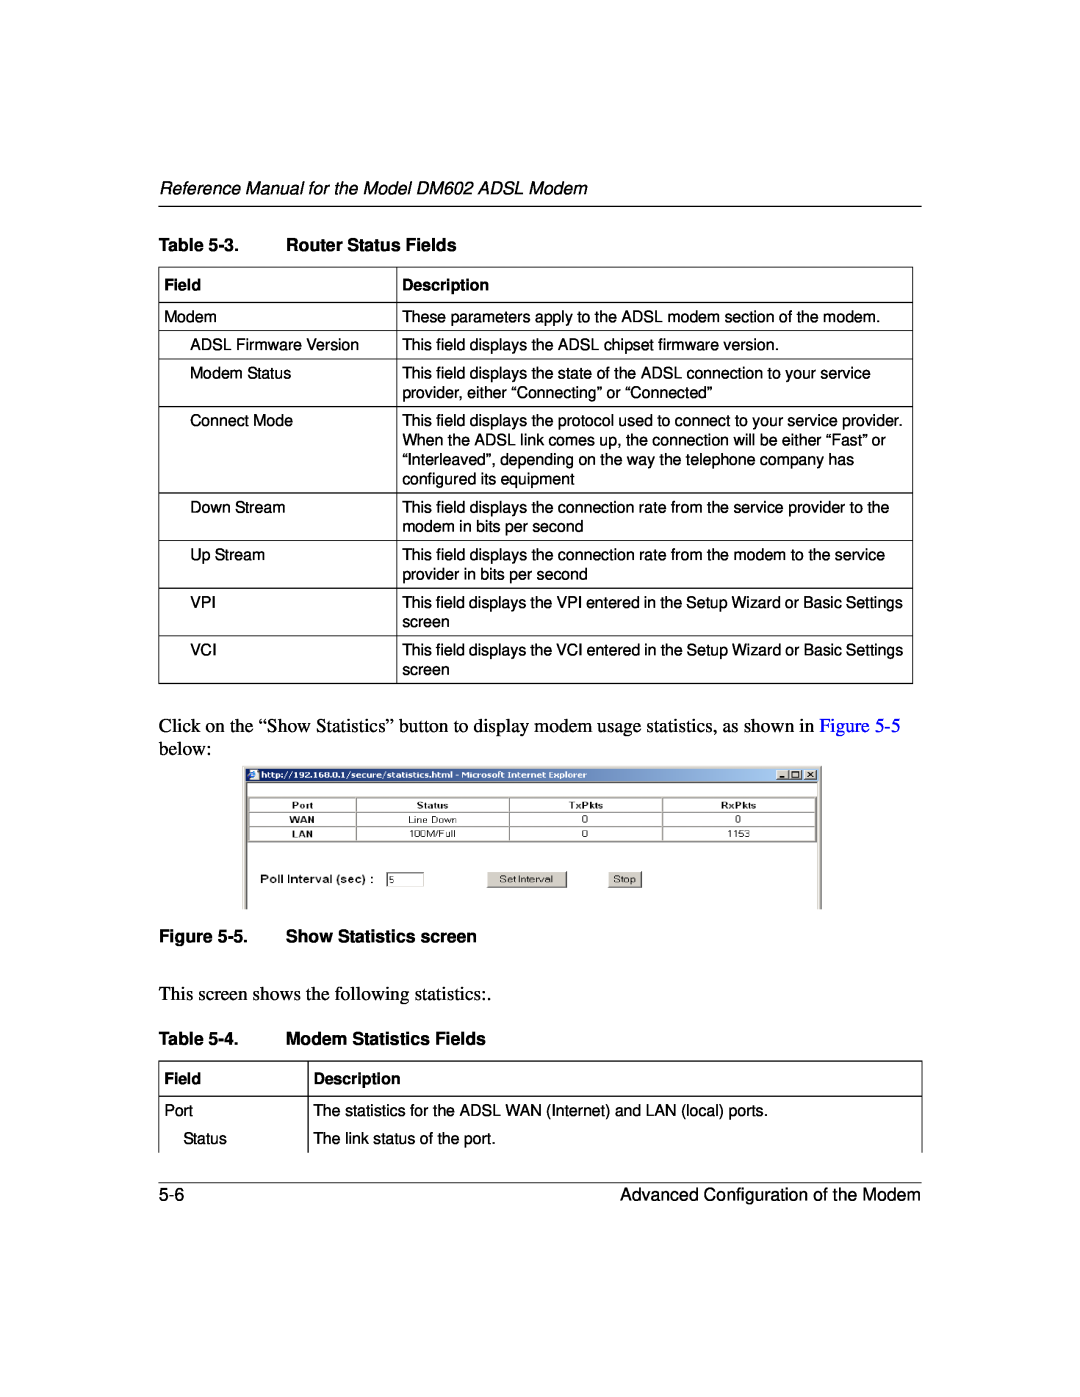 NETGEAR manual Reference Manual for the Model DM602 ADSL Modem, Router Status Fields, 5. Show Statistics screen 